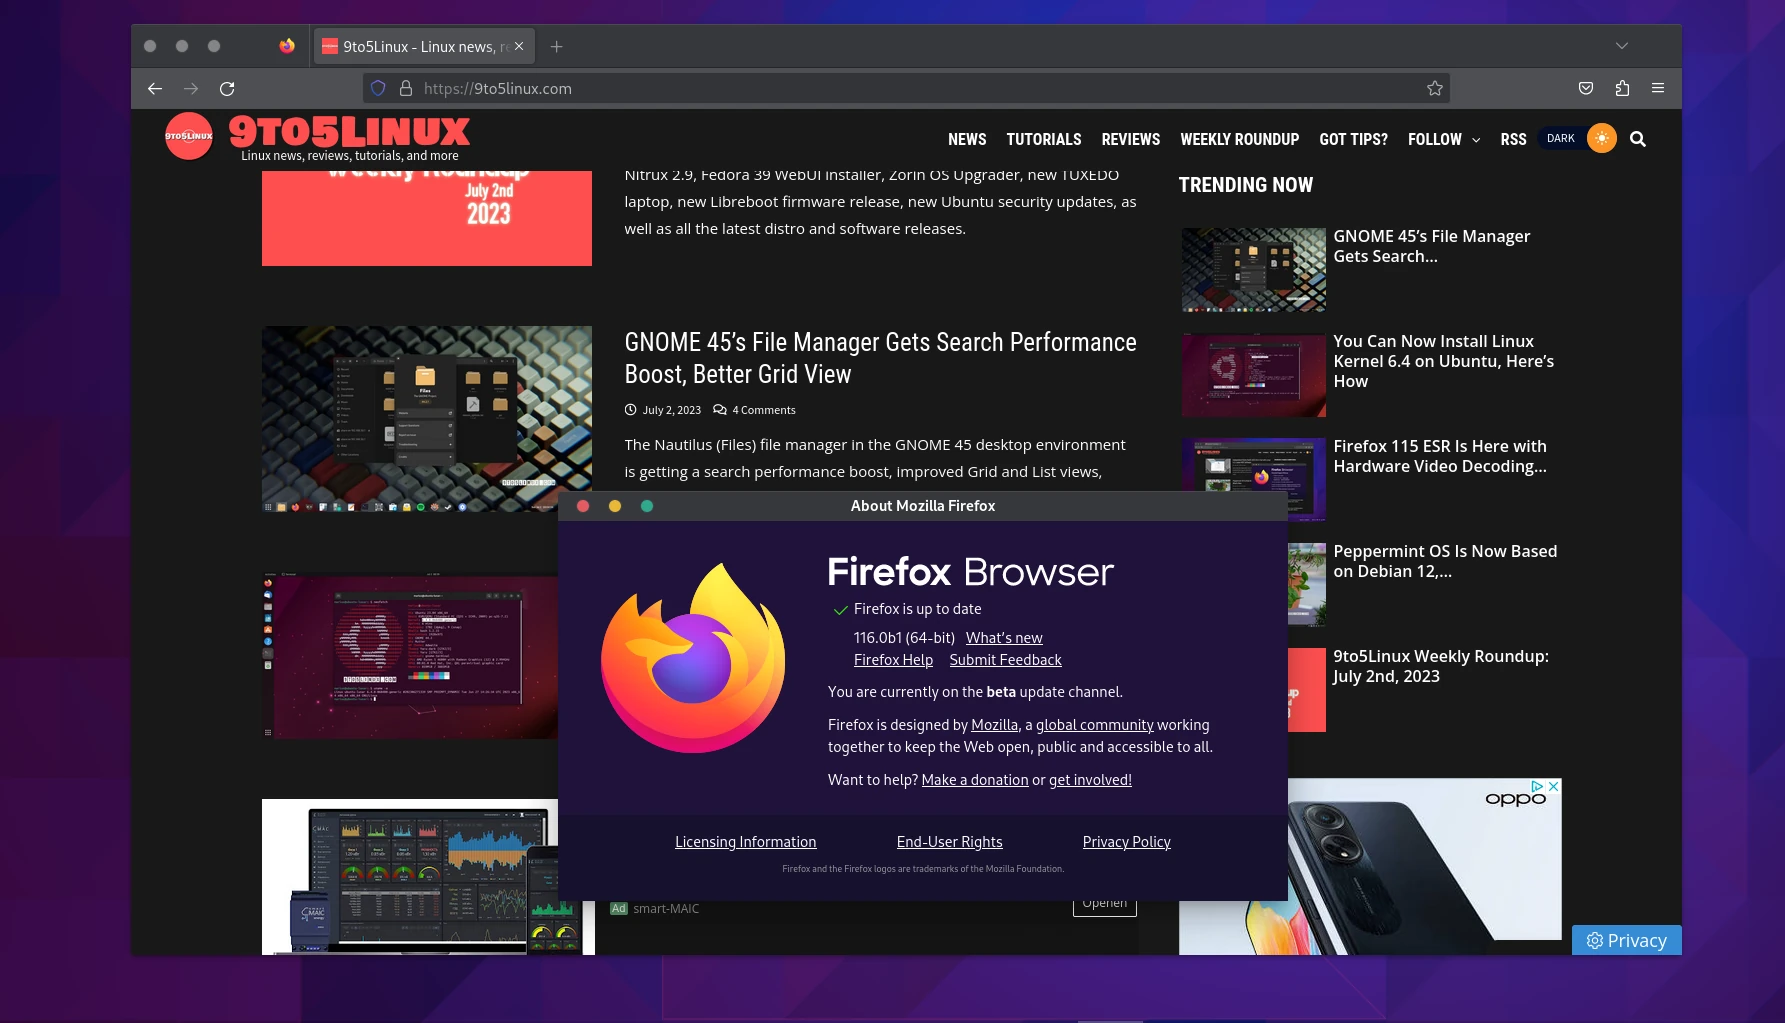 Firefox 116 Beta Brings Quick Actions in Address Bar, Improves Wayland Support